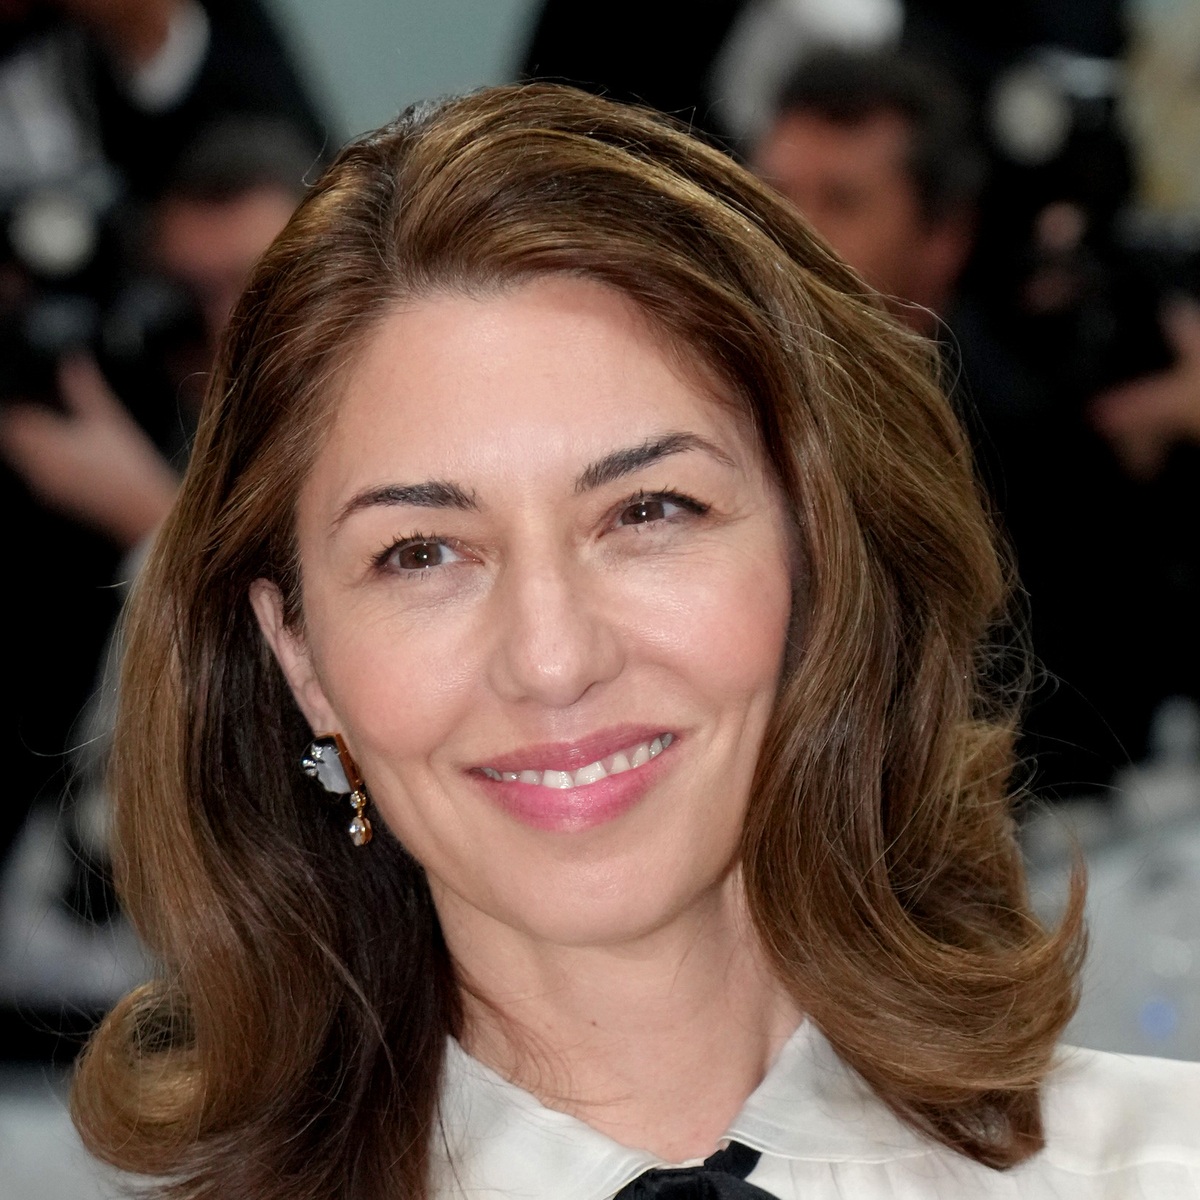 Sofia Coppola's Daughter Romy Grounded For Helicopter Stunt: Video